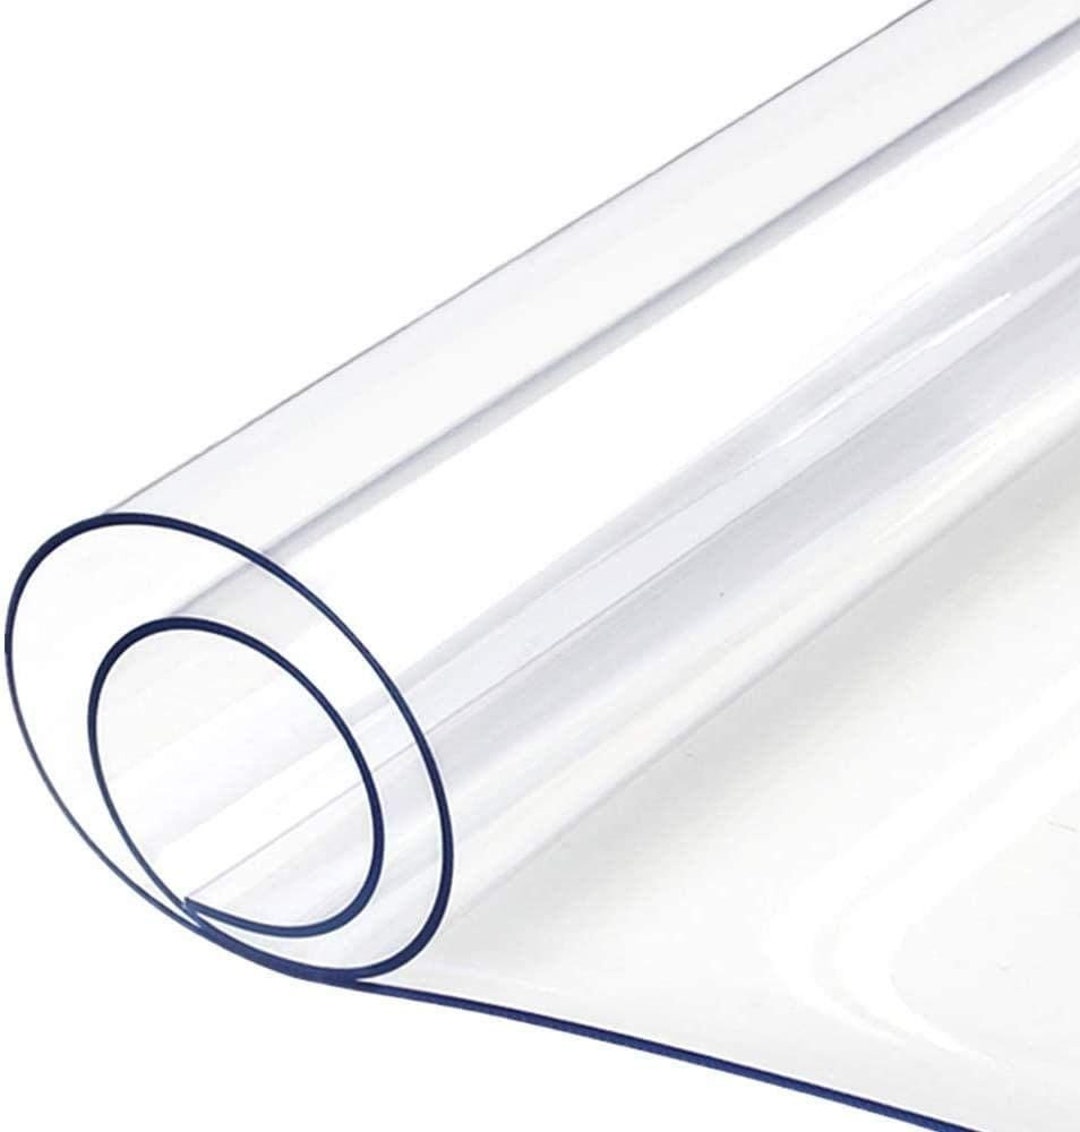 Clear PVC 0.75mm Thick Sheeting Plastic Protective Shield Vinyl Window Fire  Retardant Fabric Sold by the Metre 